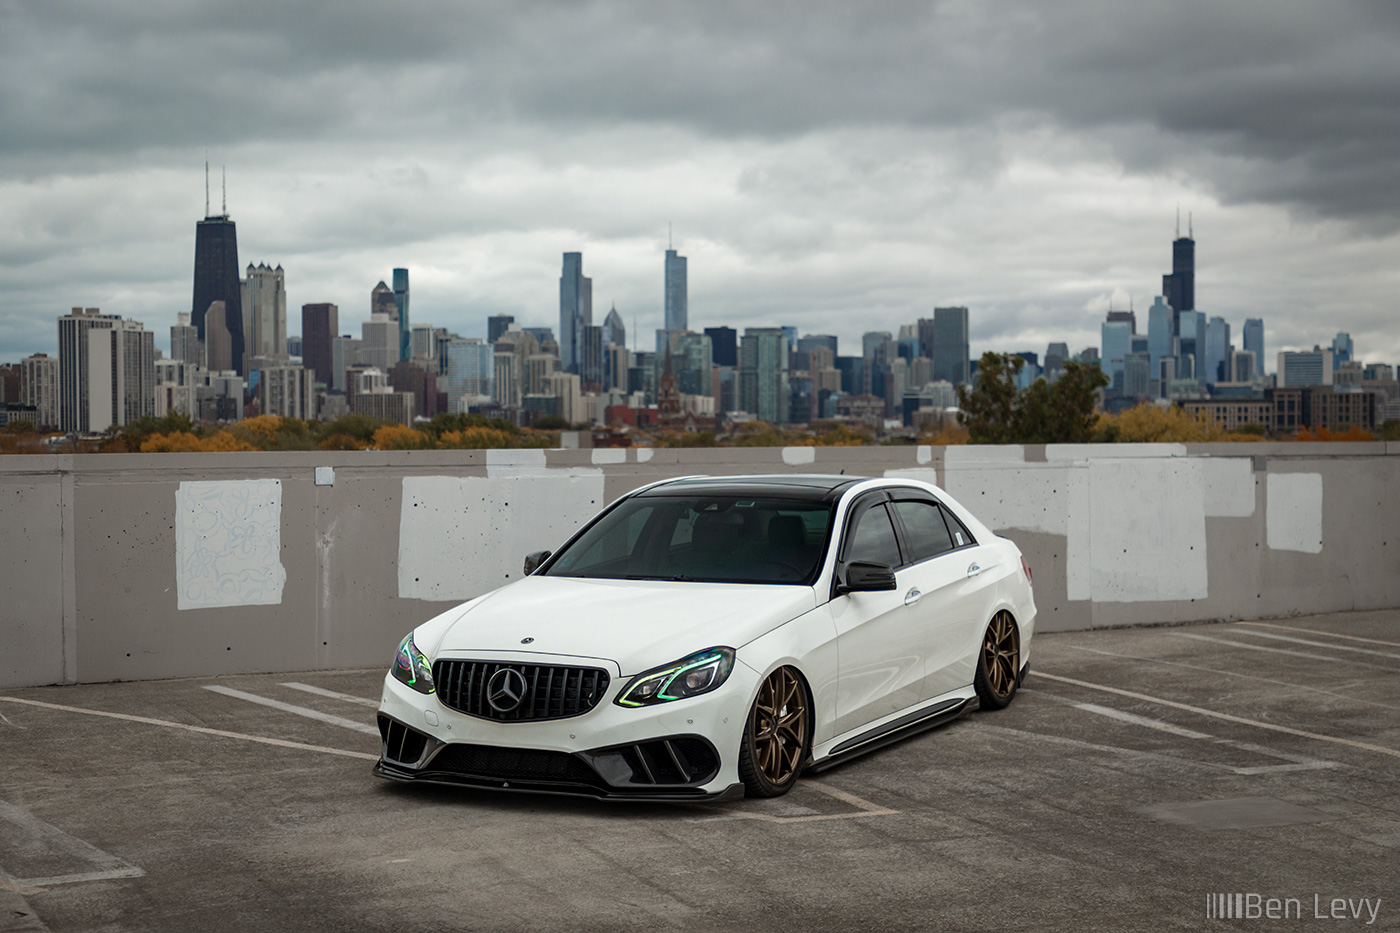 Bagged White Mercedes-Benz E550 and the Chicago Skyline